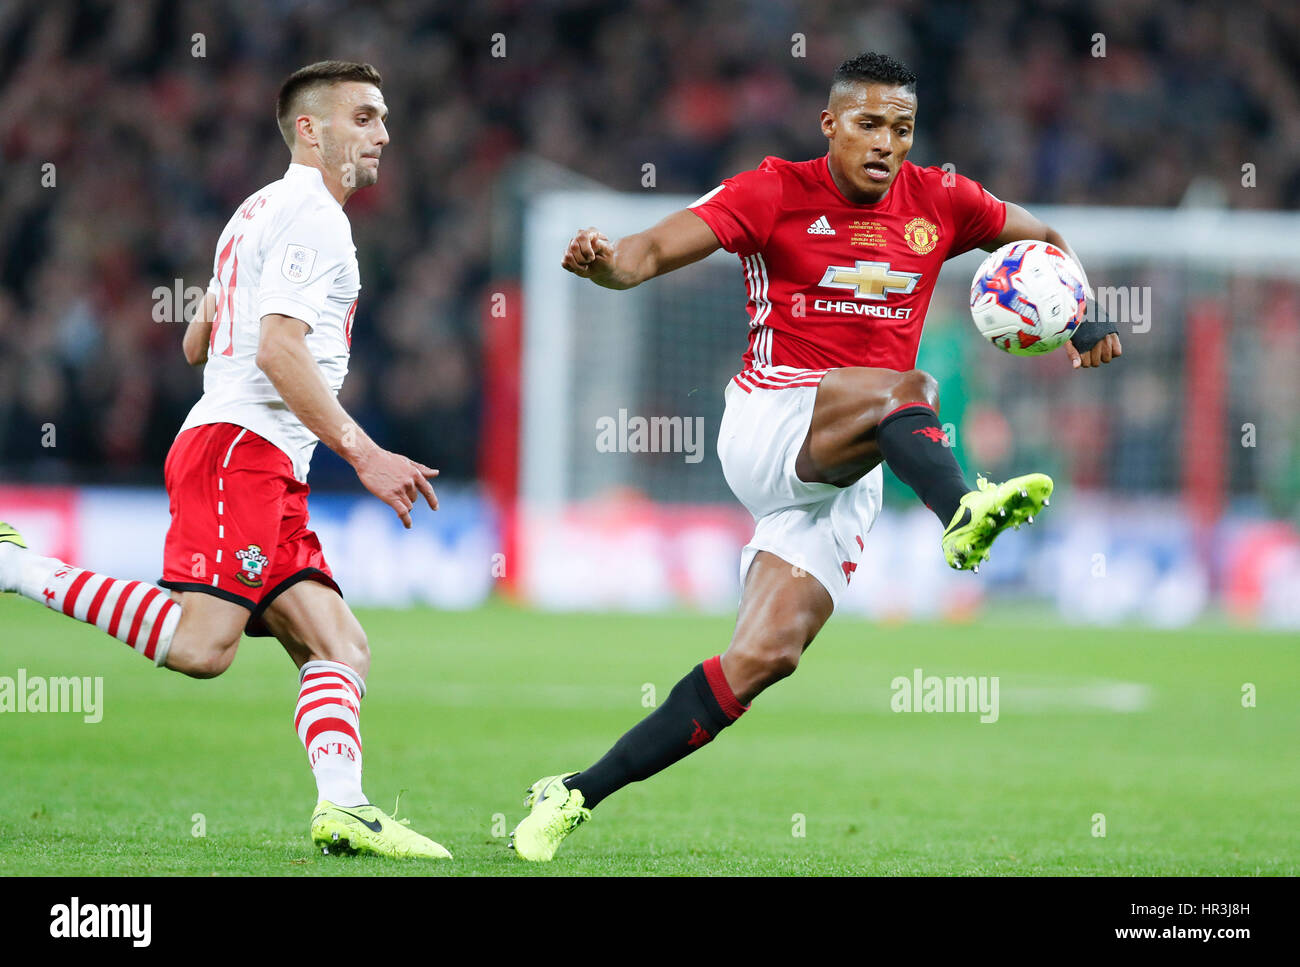 London, UK. 26th Feb, 2017. Manchester United's Antonio Valencia (R) controls the ball during the EFL Cup Final between Manchester United and Southampton at Wembley Stadium in London, Britain on Feb. 26, 2017. Credit: Han Yan/Xinhua/Alamy Live News Stock Photo